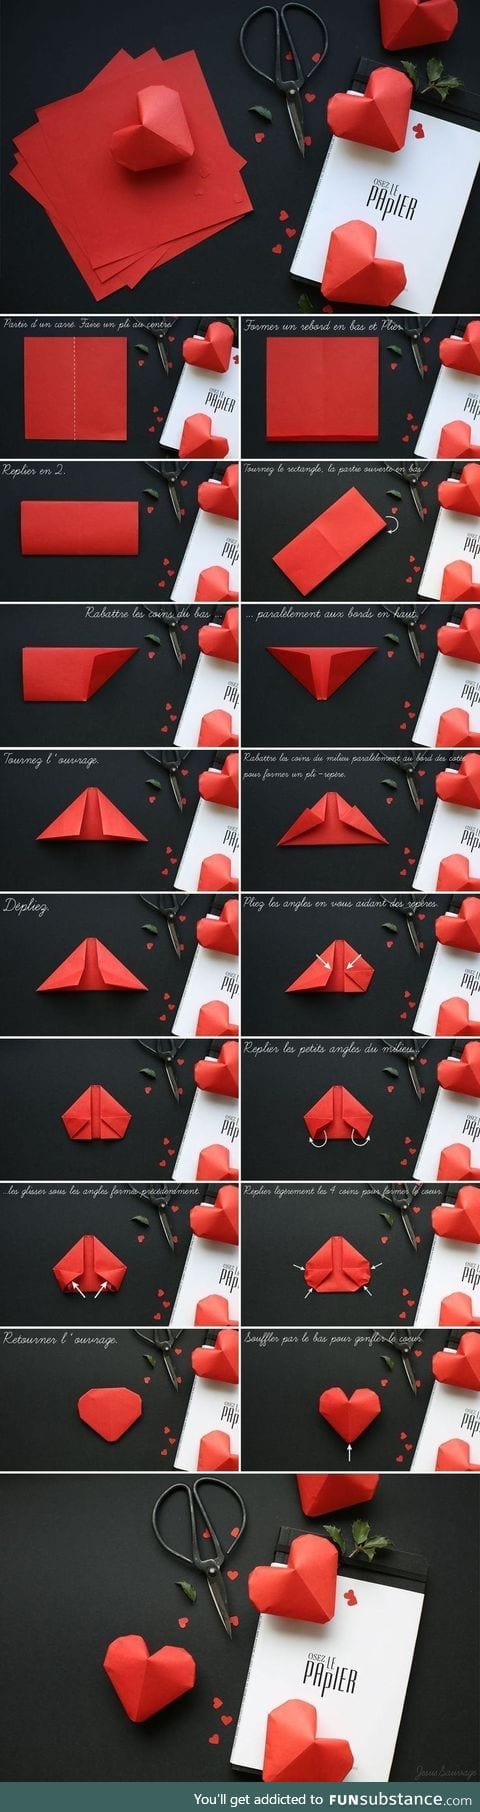 How to make a 3D heart origami